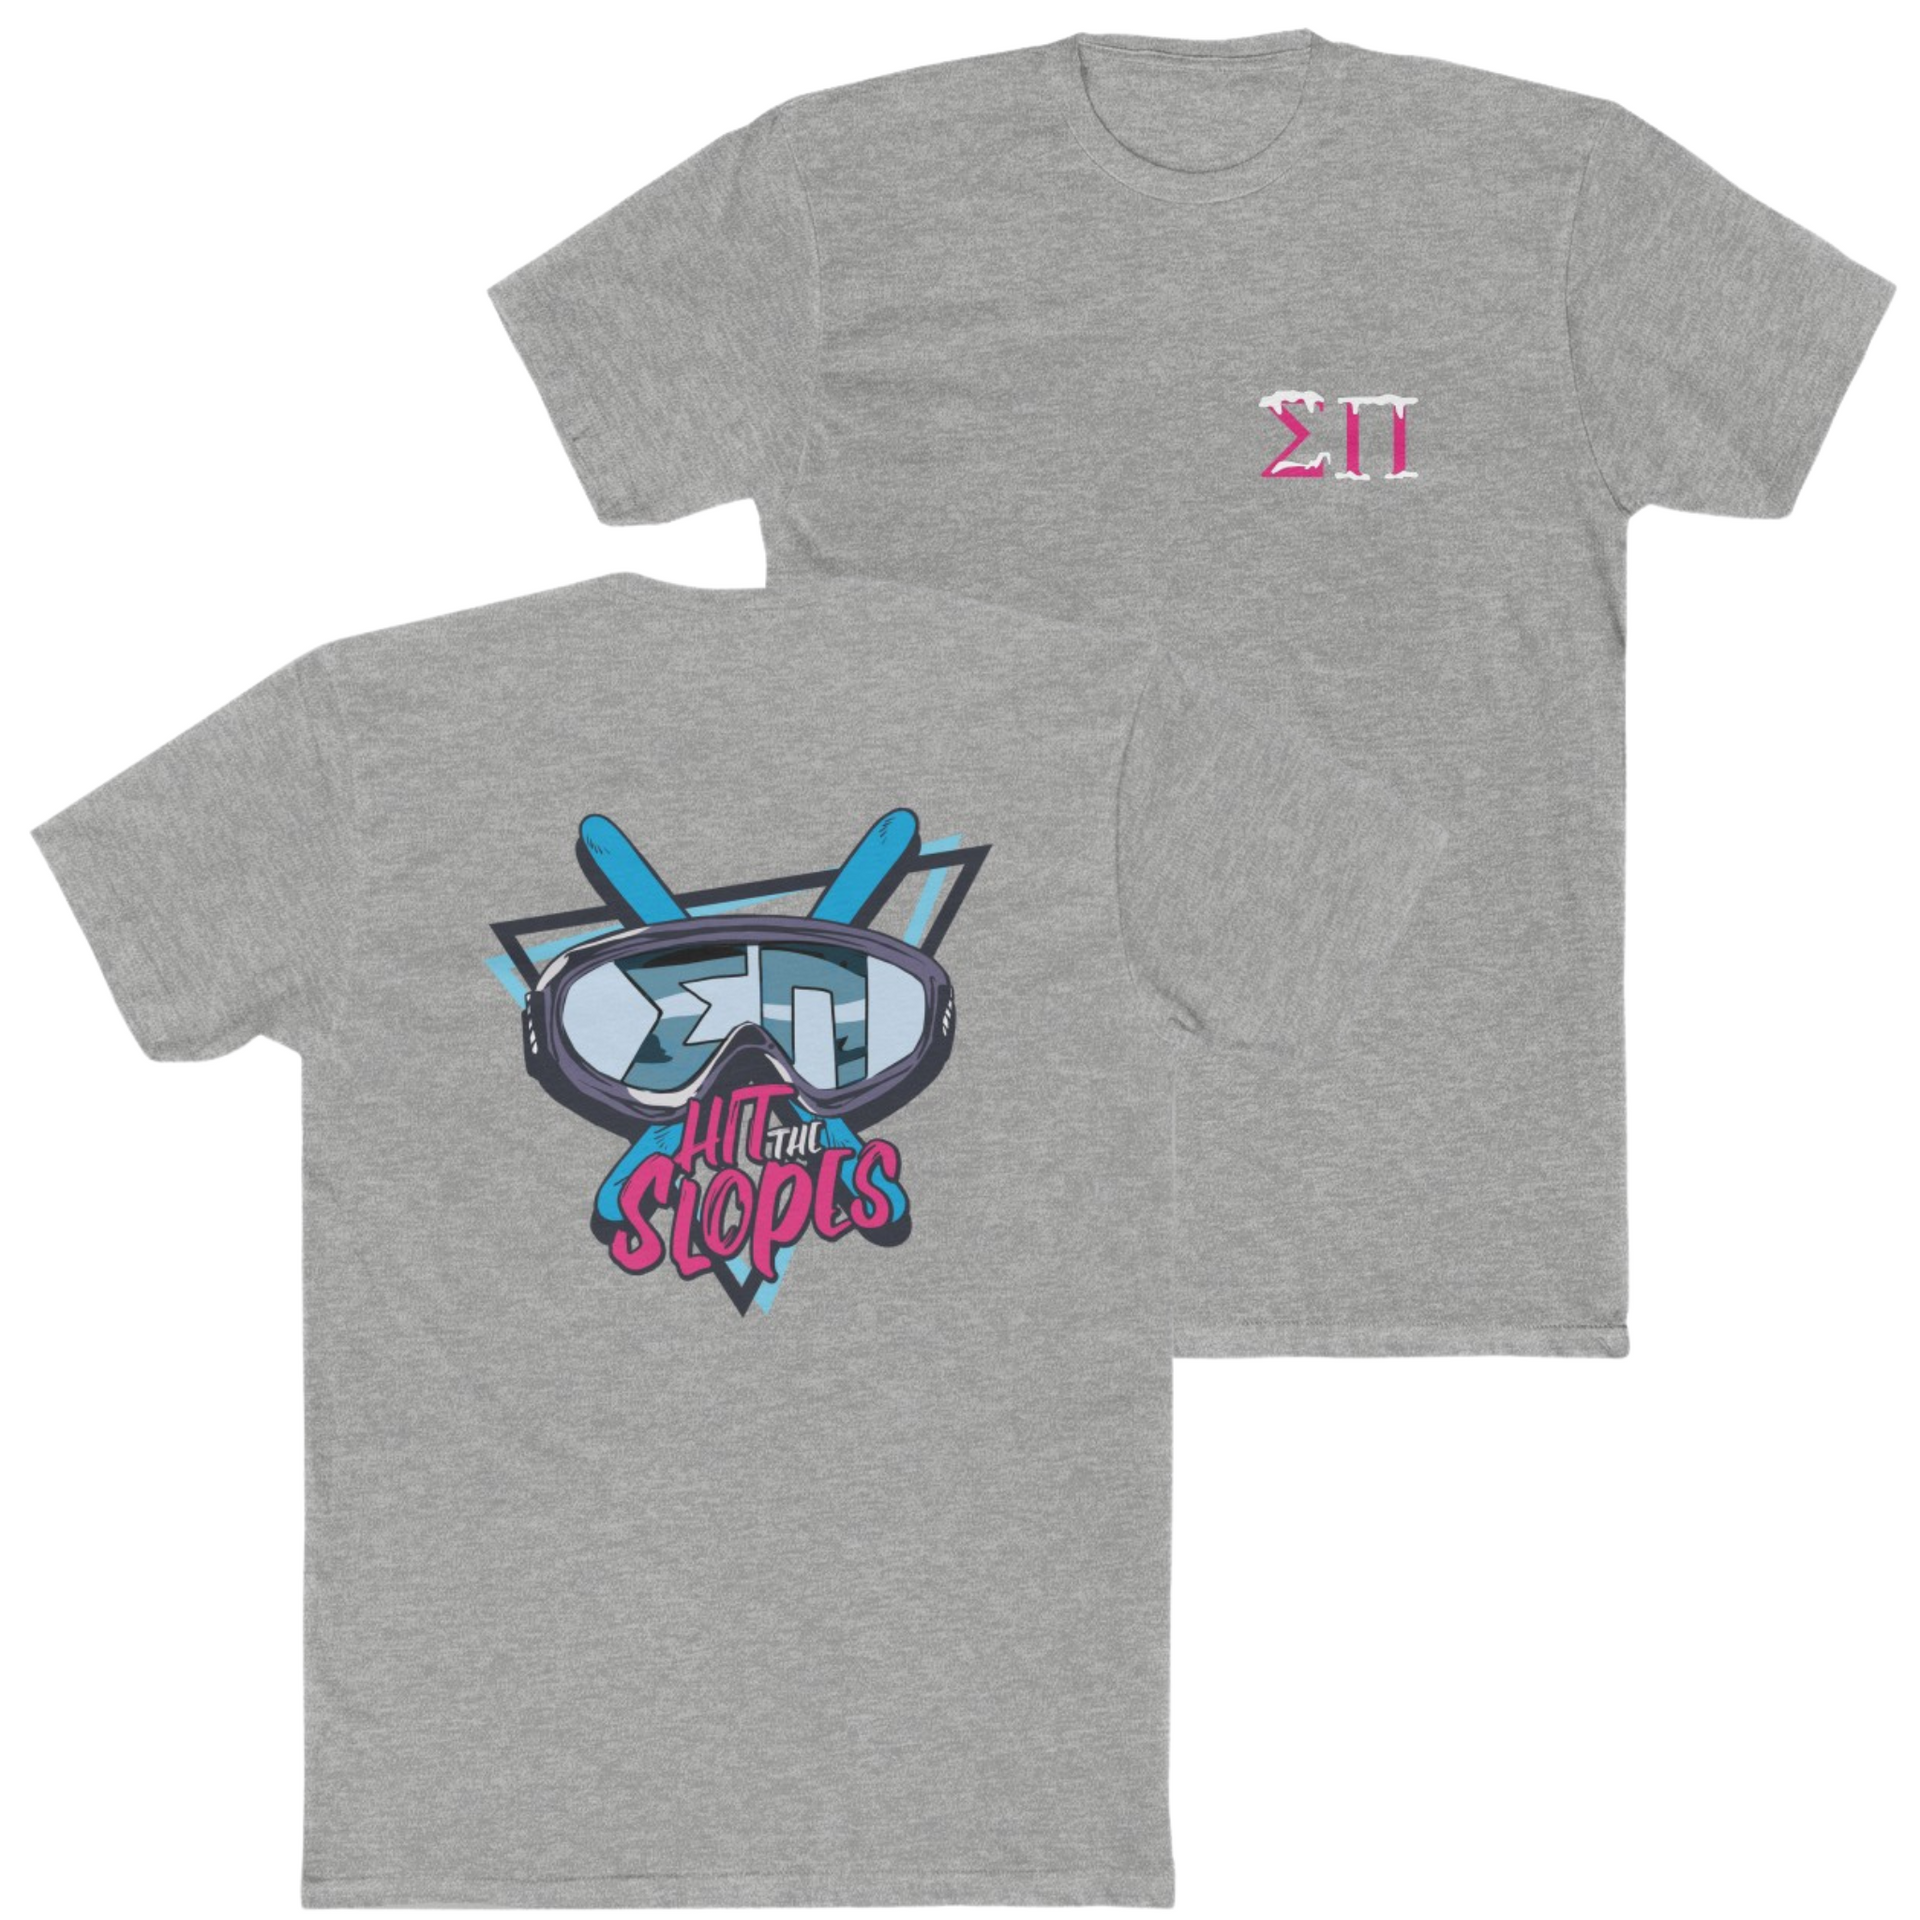 Grey Sigma Pi Graphic T-Shirt | Hit the Slopes | Sigma Pi Apparel and Merchandise